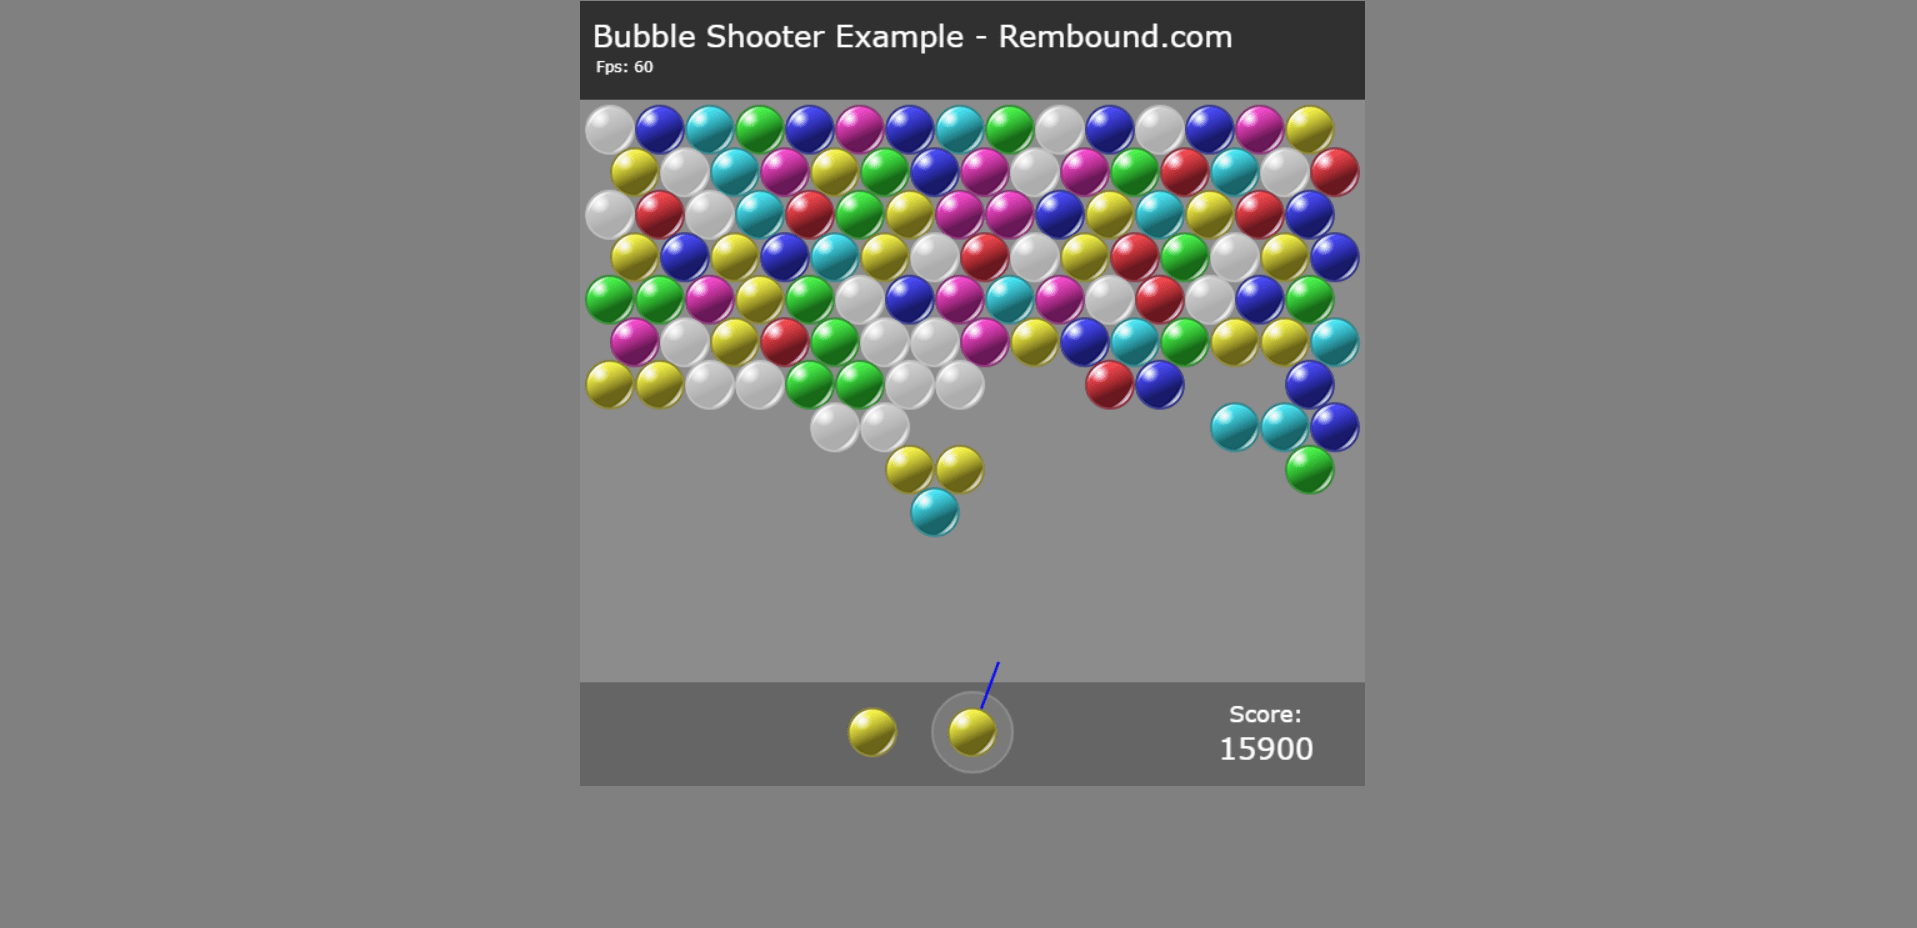 Screenshot 90 - BUBBLE SHOOTER GAME IN HTML5, JAVASCRIPT WITH SOURCE CODE